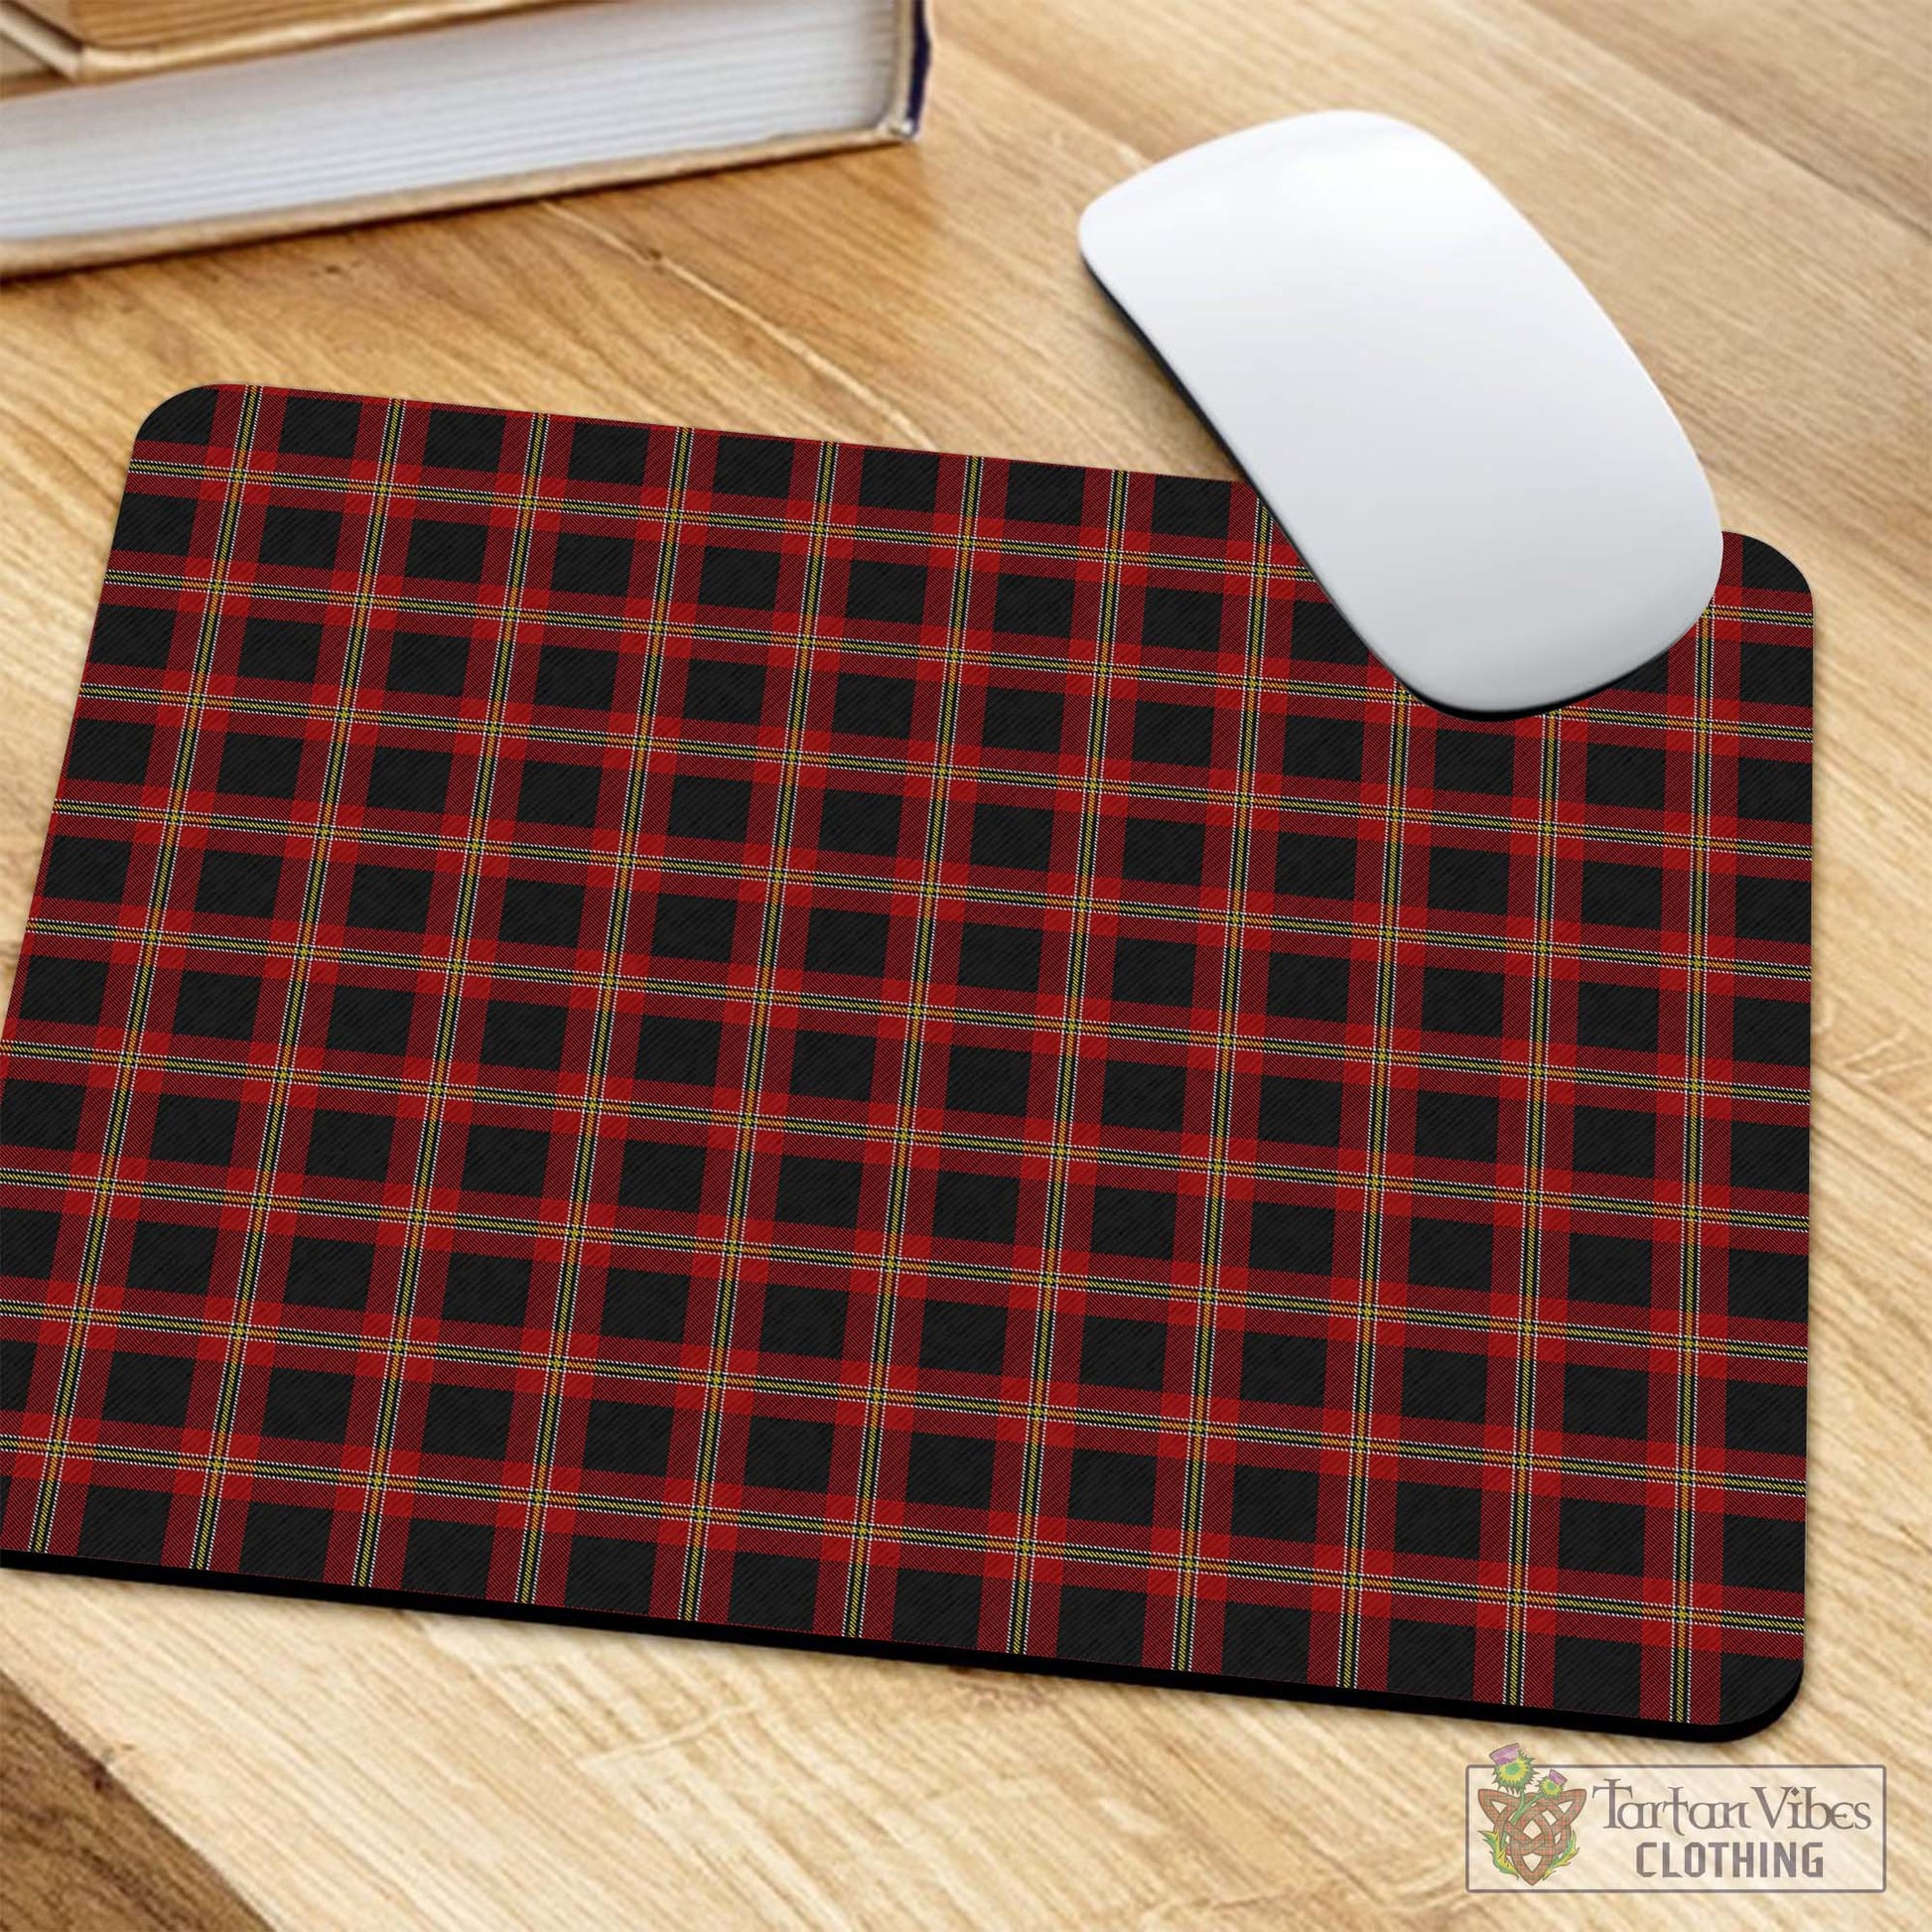 Tartan Vibes Clothing Perry-Pirrie Tartan Mouse Pad